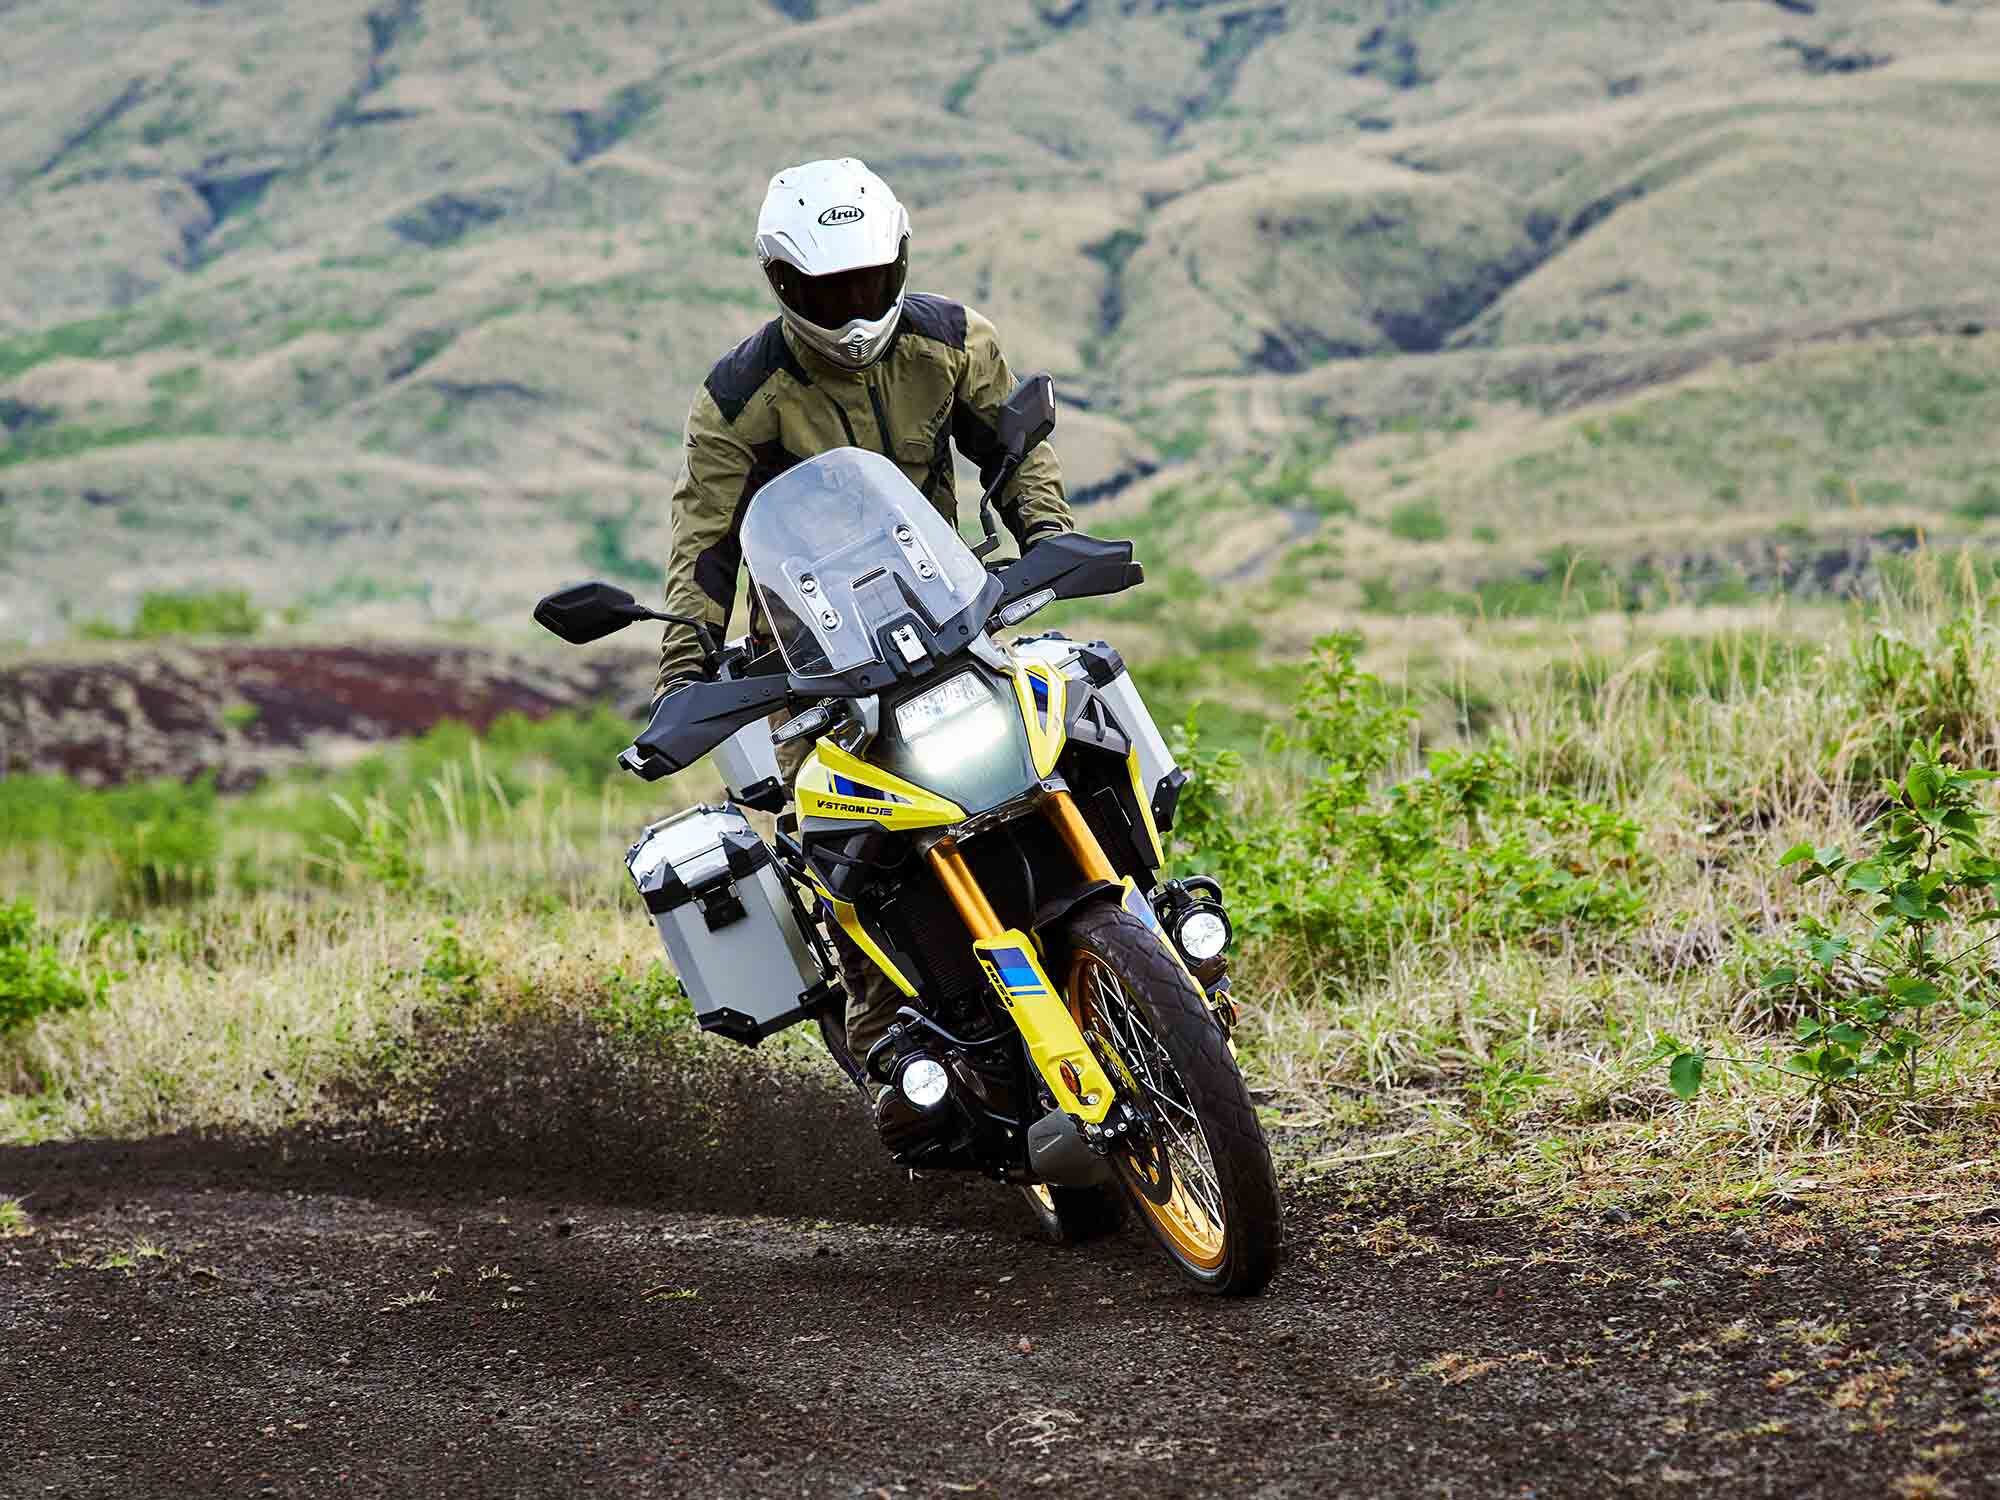 Turn off the rear ABS and switch to Gravel mode and get maximum off-road control.